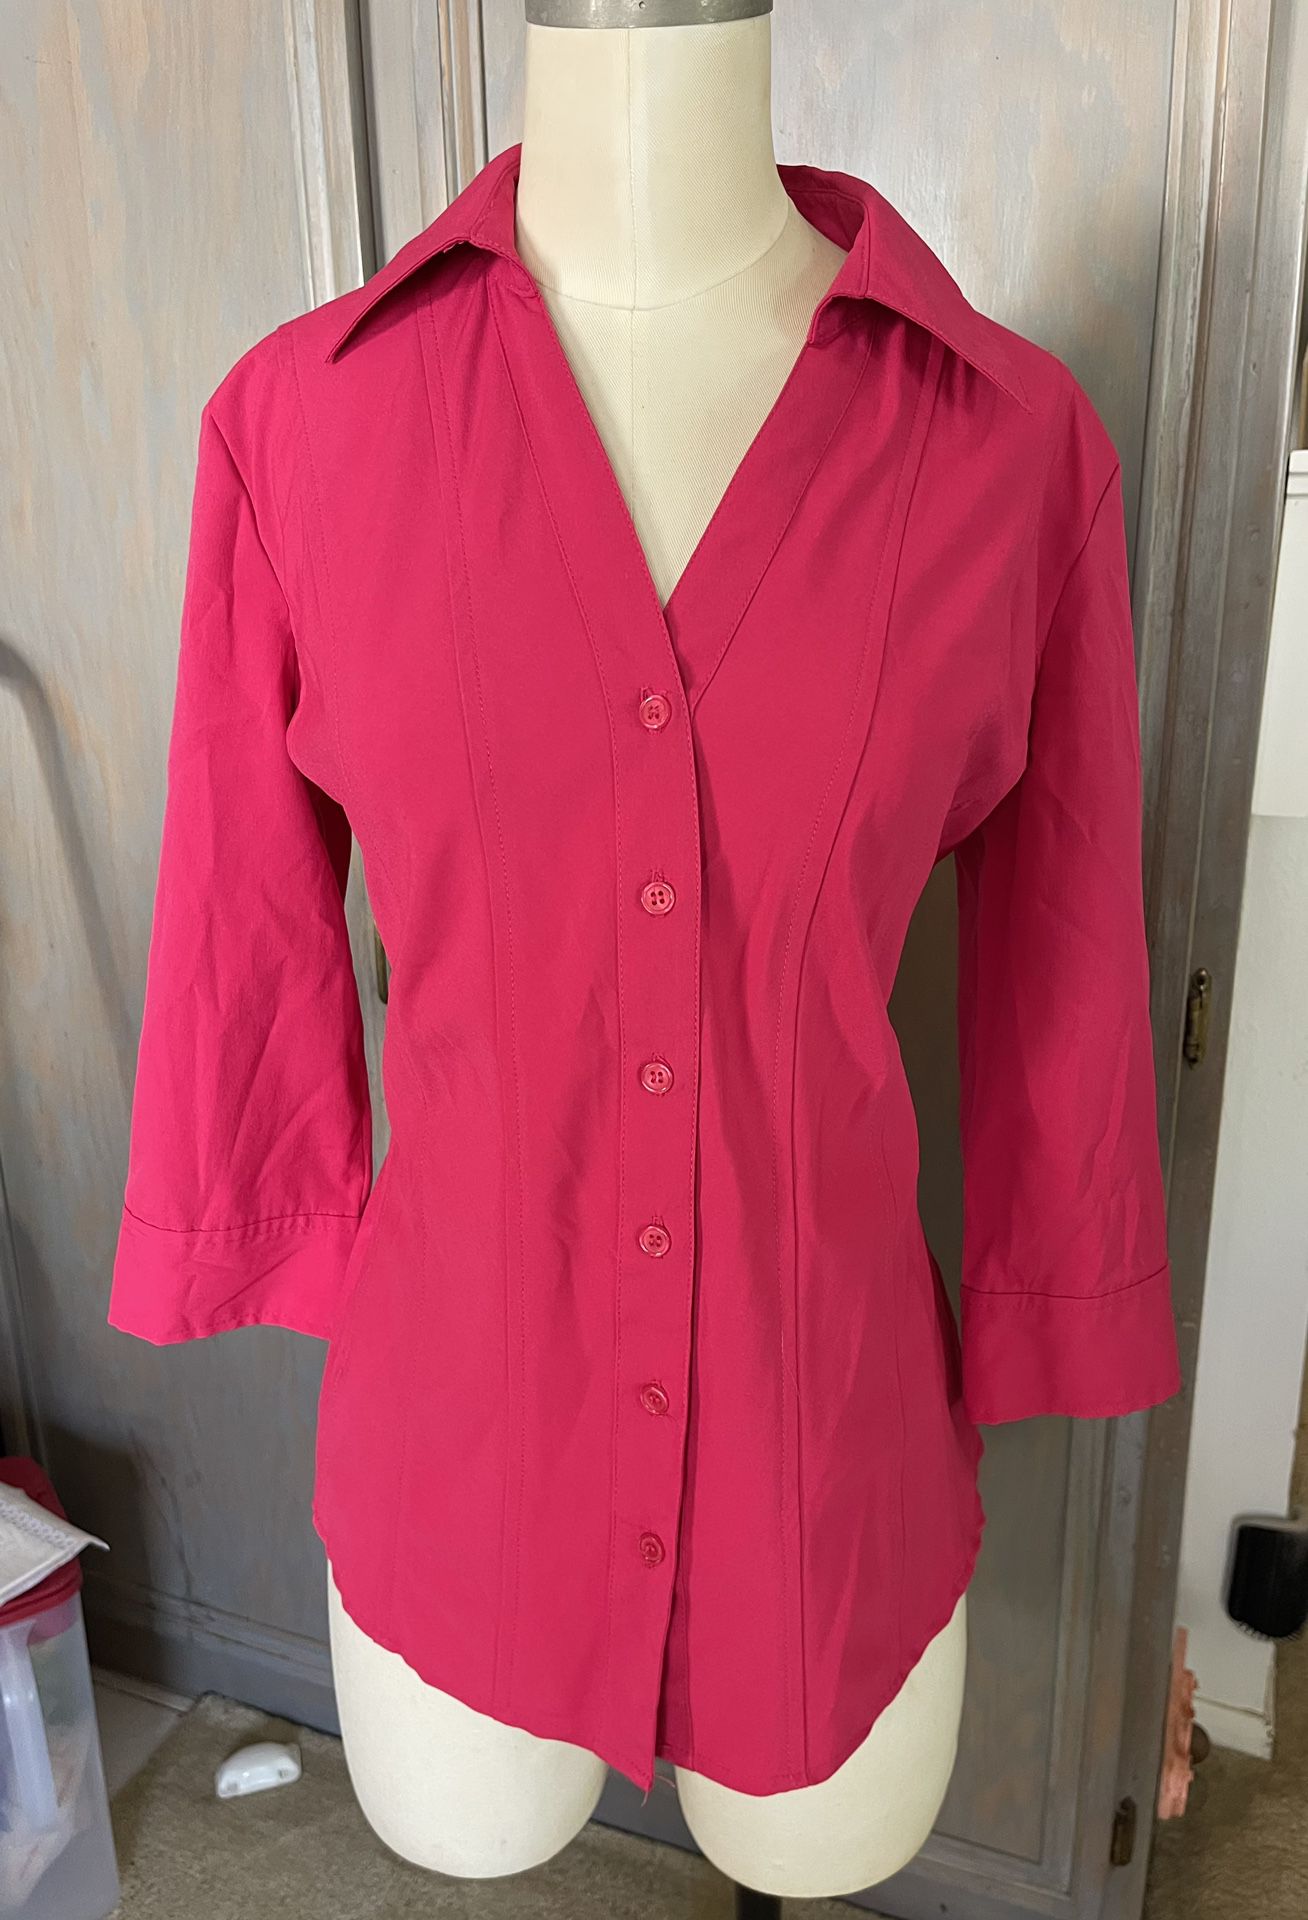 Style & Co Button Down 3/4 sleeve collared blouse size PM